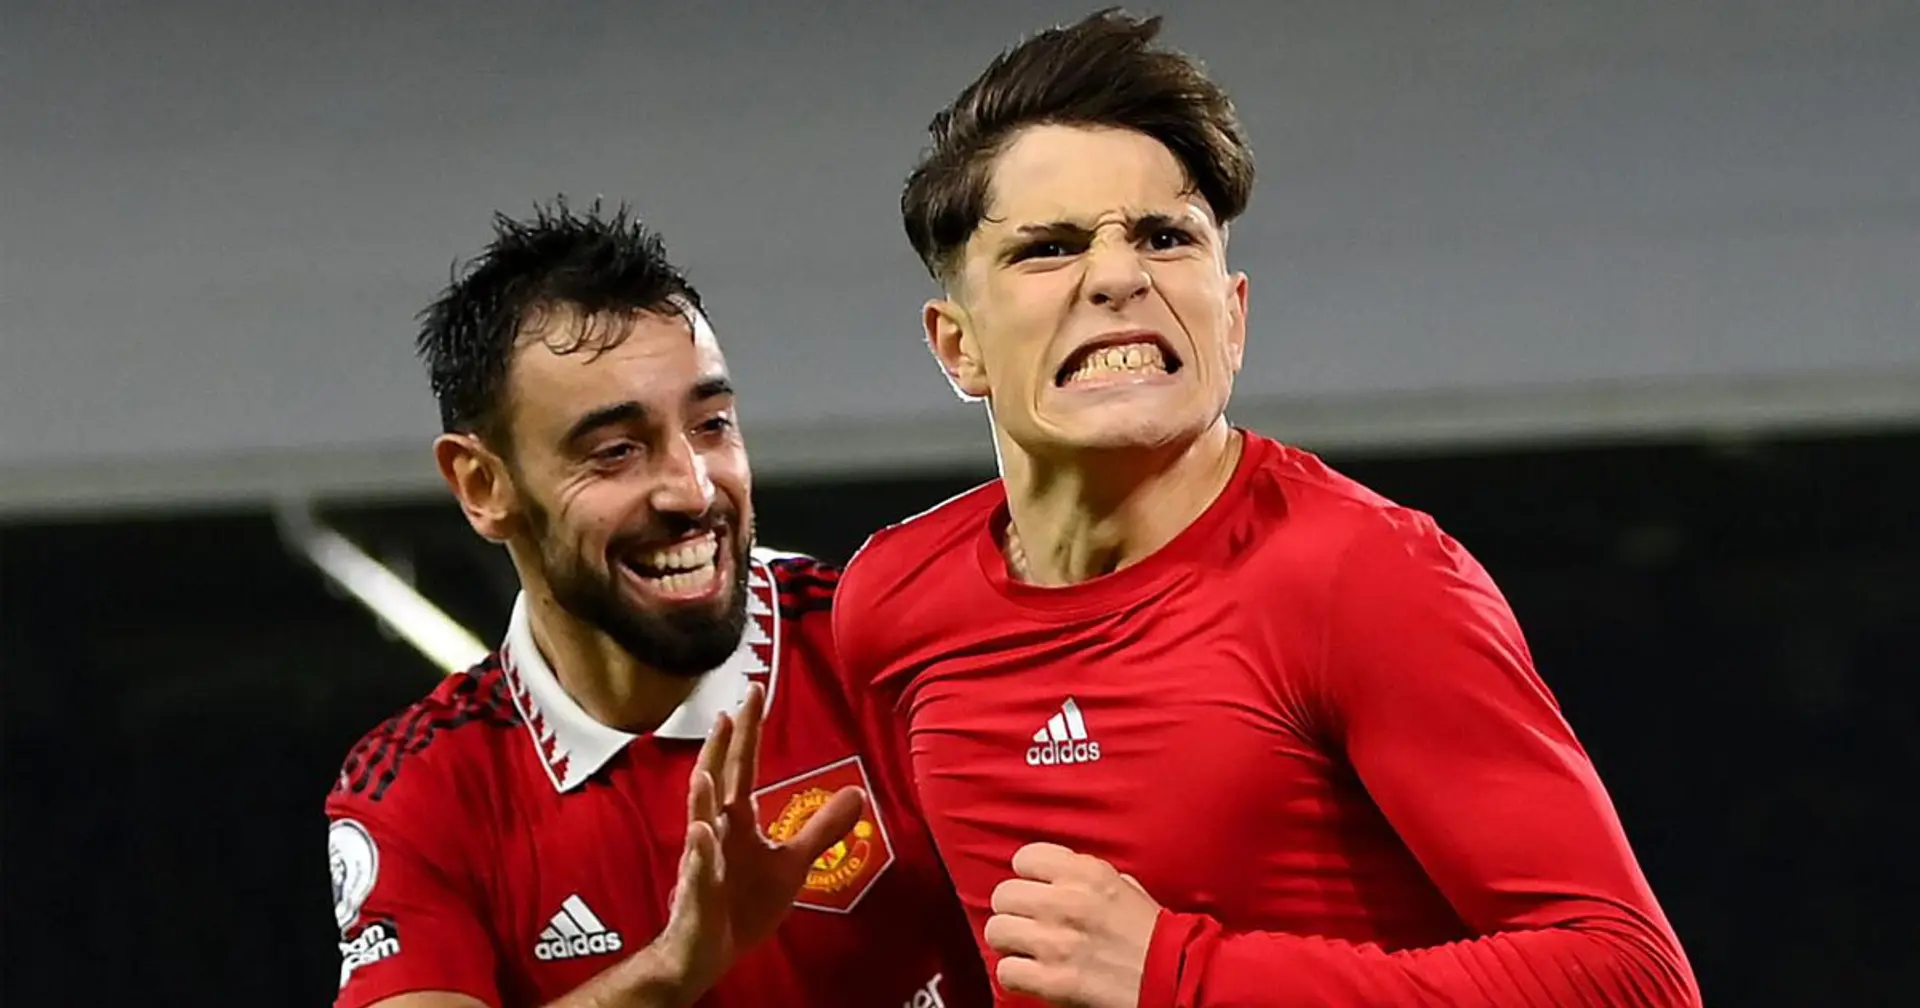 OFFICIAL: Garnacho wins Man United's Player of the Month award 